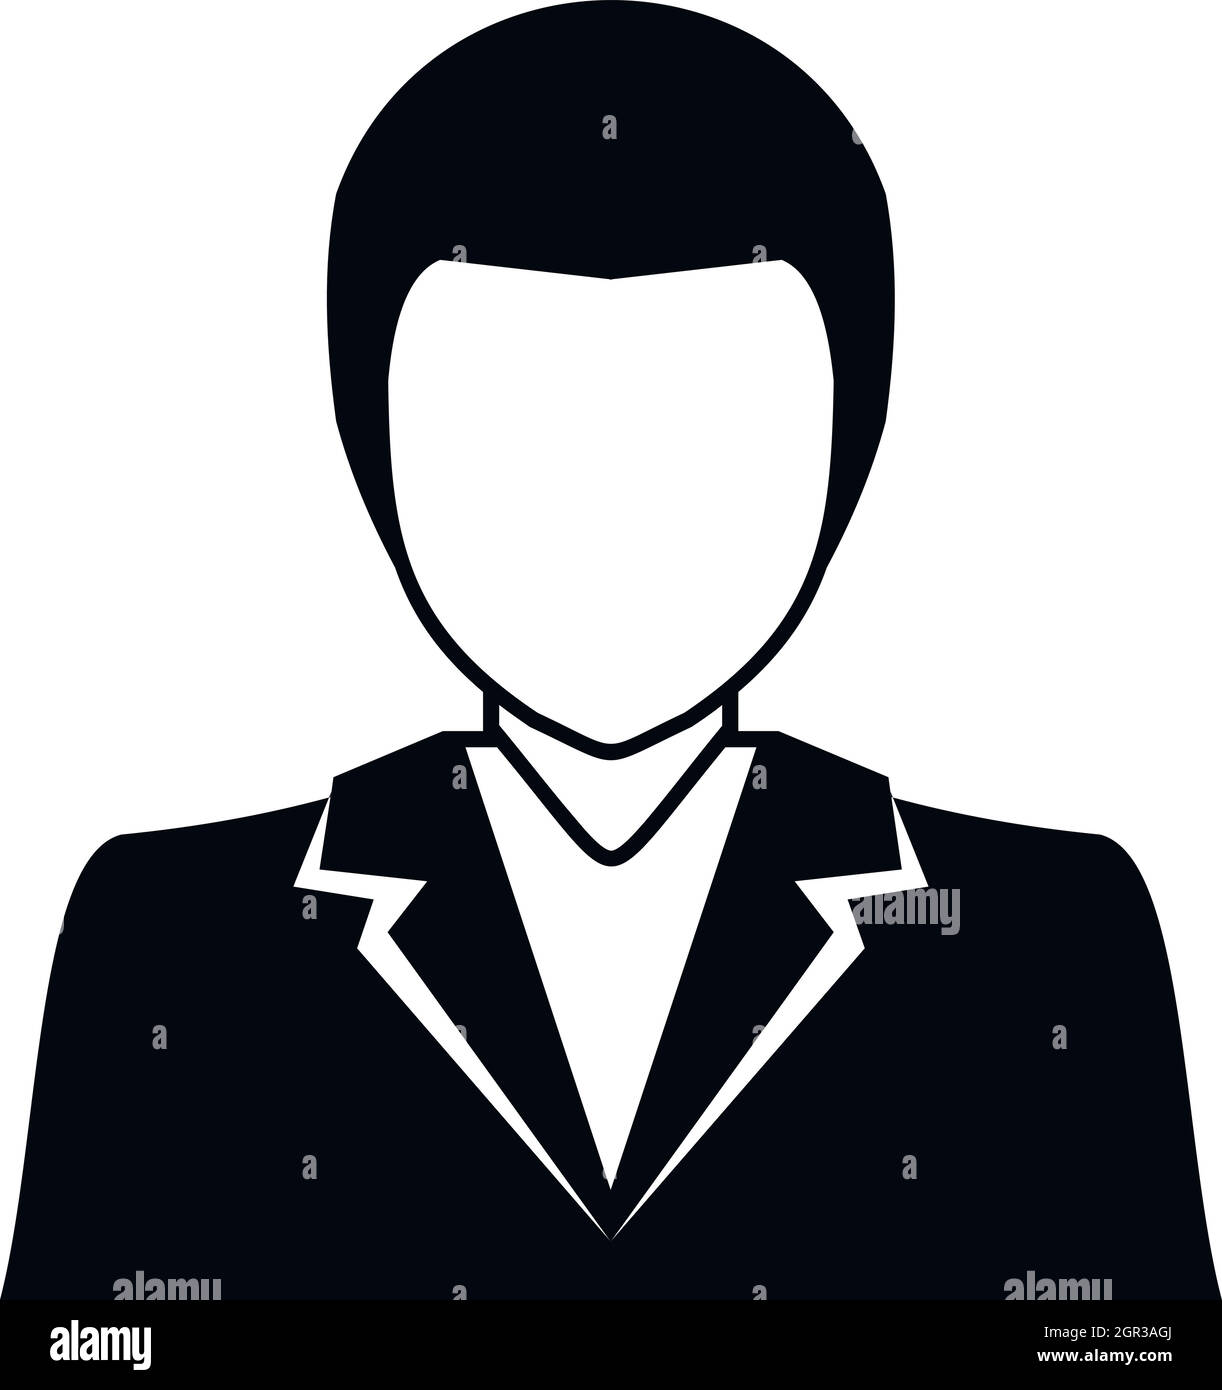 Male avatar profile picture icon, simple style Stock Vector